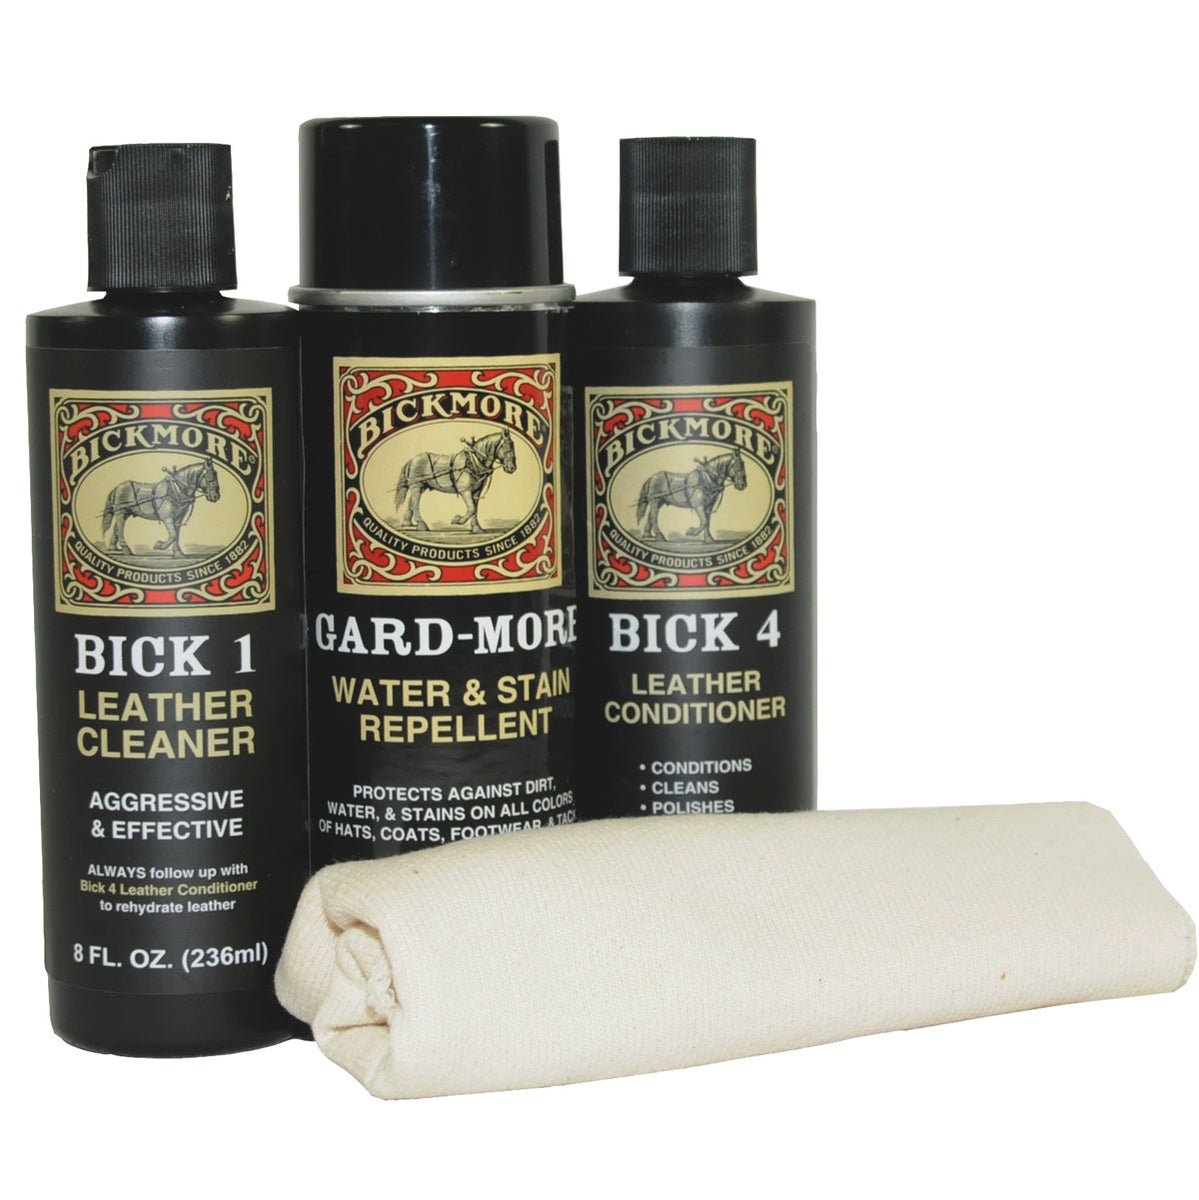 Bick 4 Leather Conditioner by Bickmore - Review 